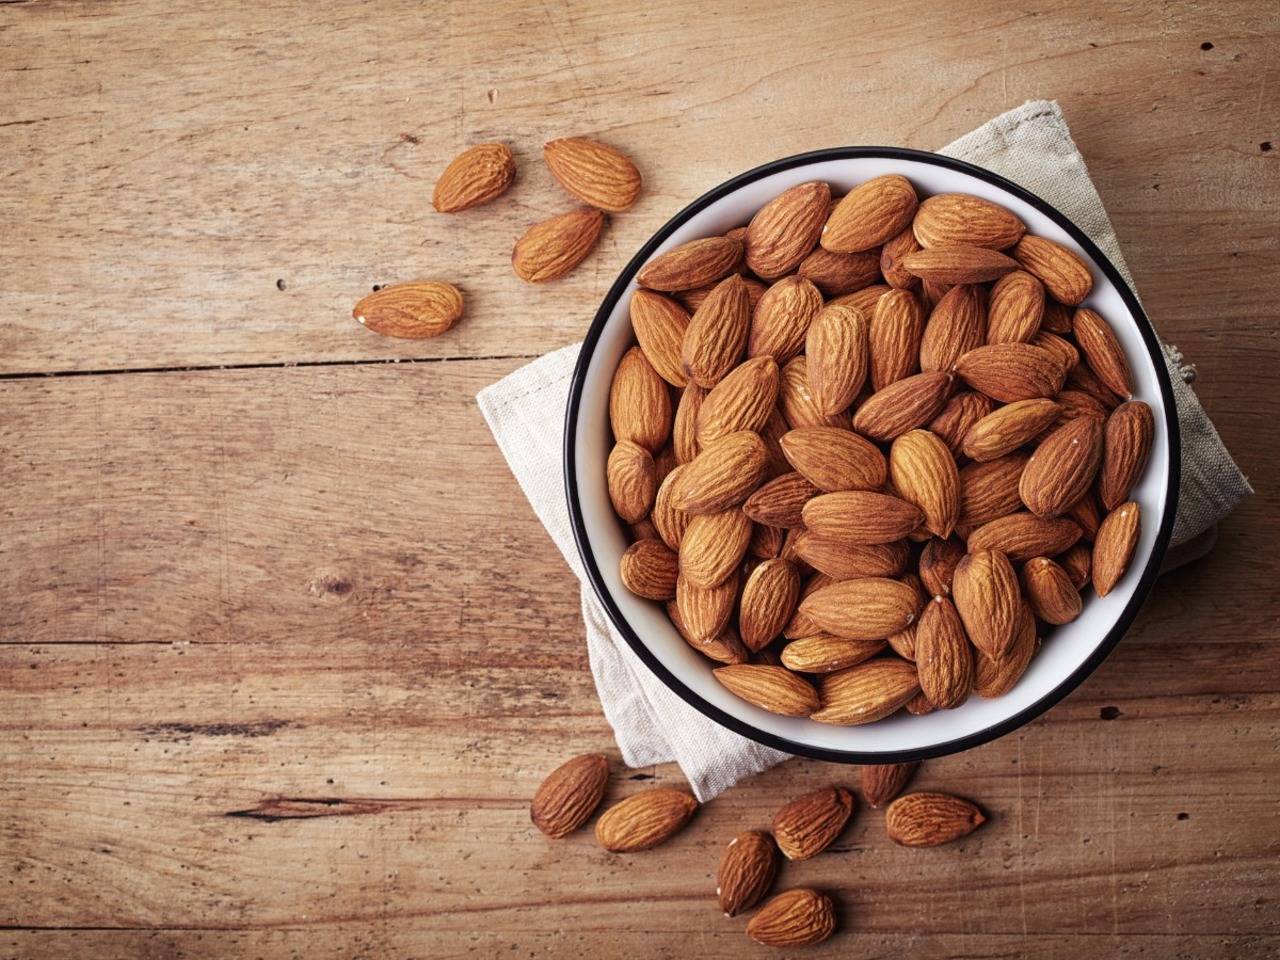 Almonds Nutrition Facts & Calories: Are almonds good for you? Nutritional  facts and health benefits explained | Almonds protein, fiber, calcium,  carbs | - Times of India